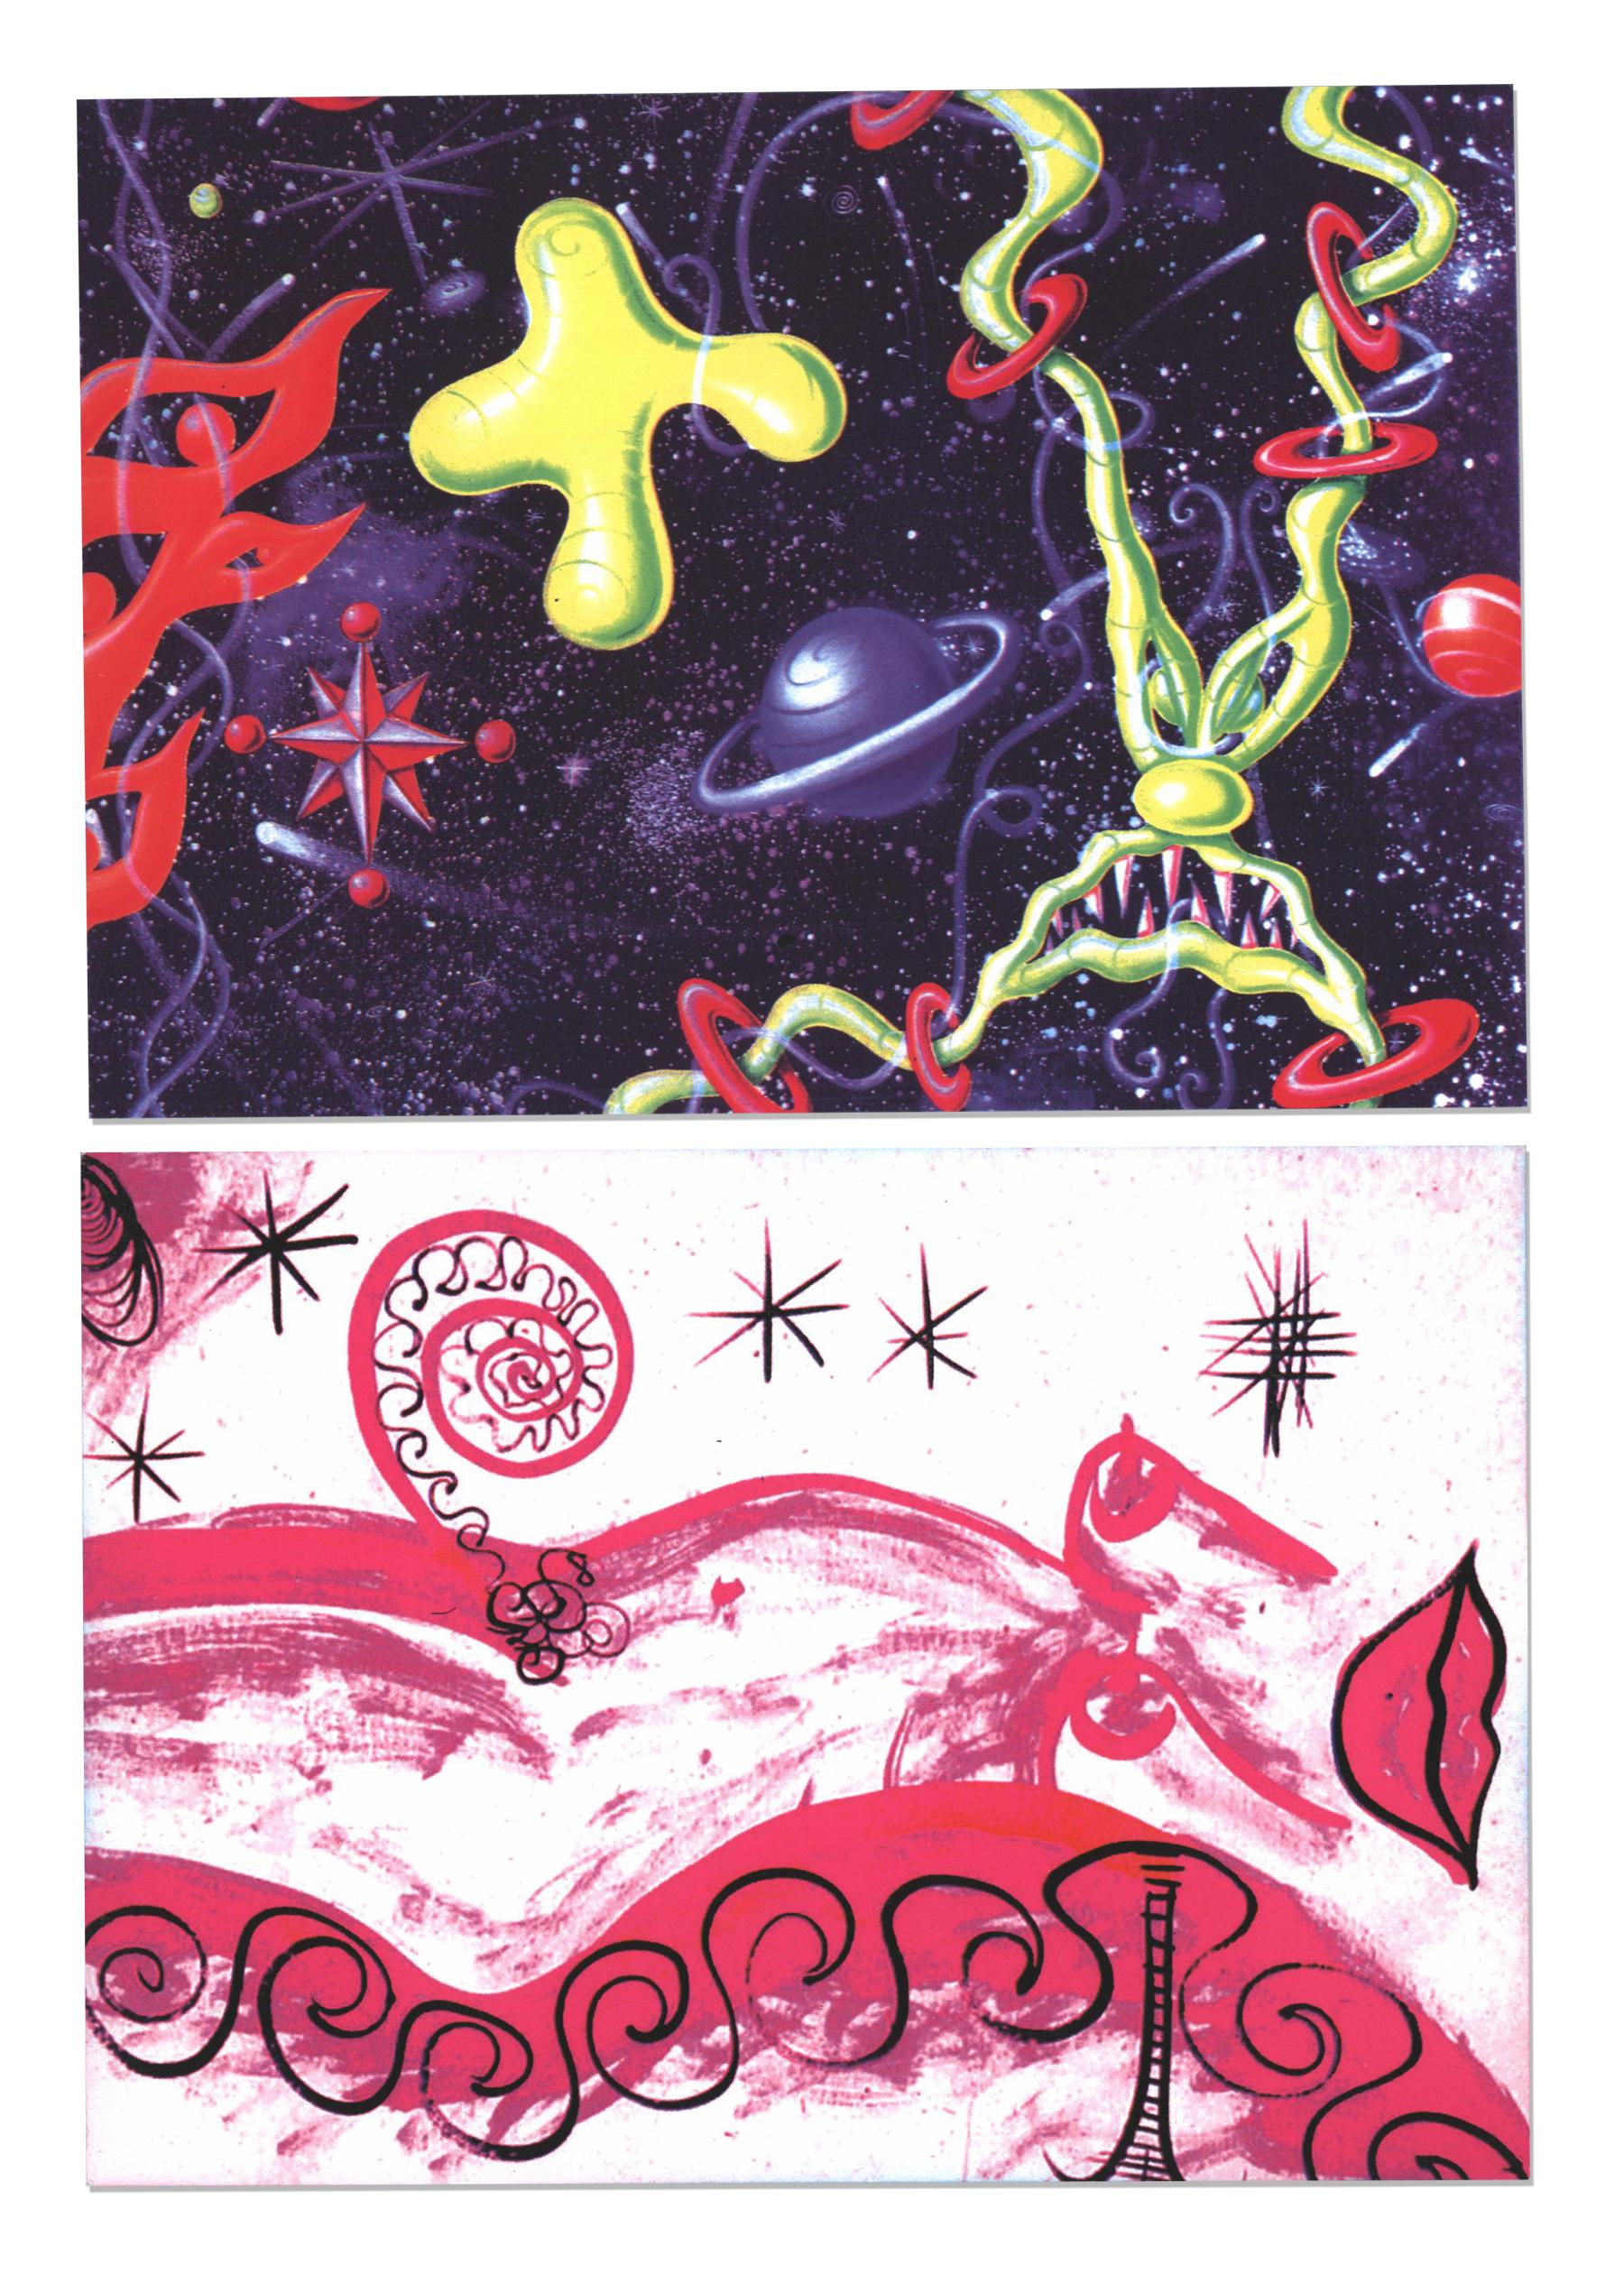 Kenny Scharf Cosmic Tavern:
A set of 2 rare 1990s announcement cards designed by Scharf on the occasion(s) of the grand-opening of the Kenny Scharf Cosmic Tavern - a VIP room designed by Scharf for the legendary New York nightclub, The Tunnel.